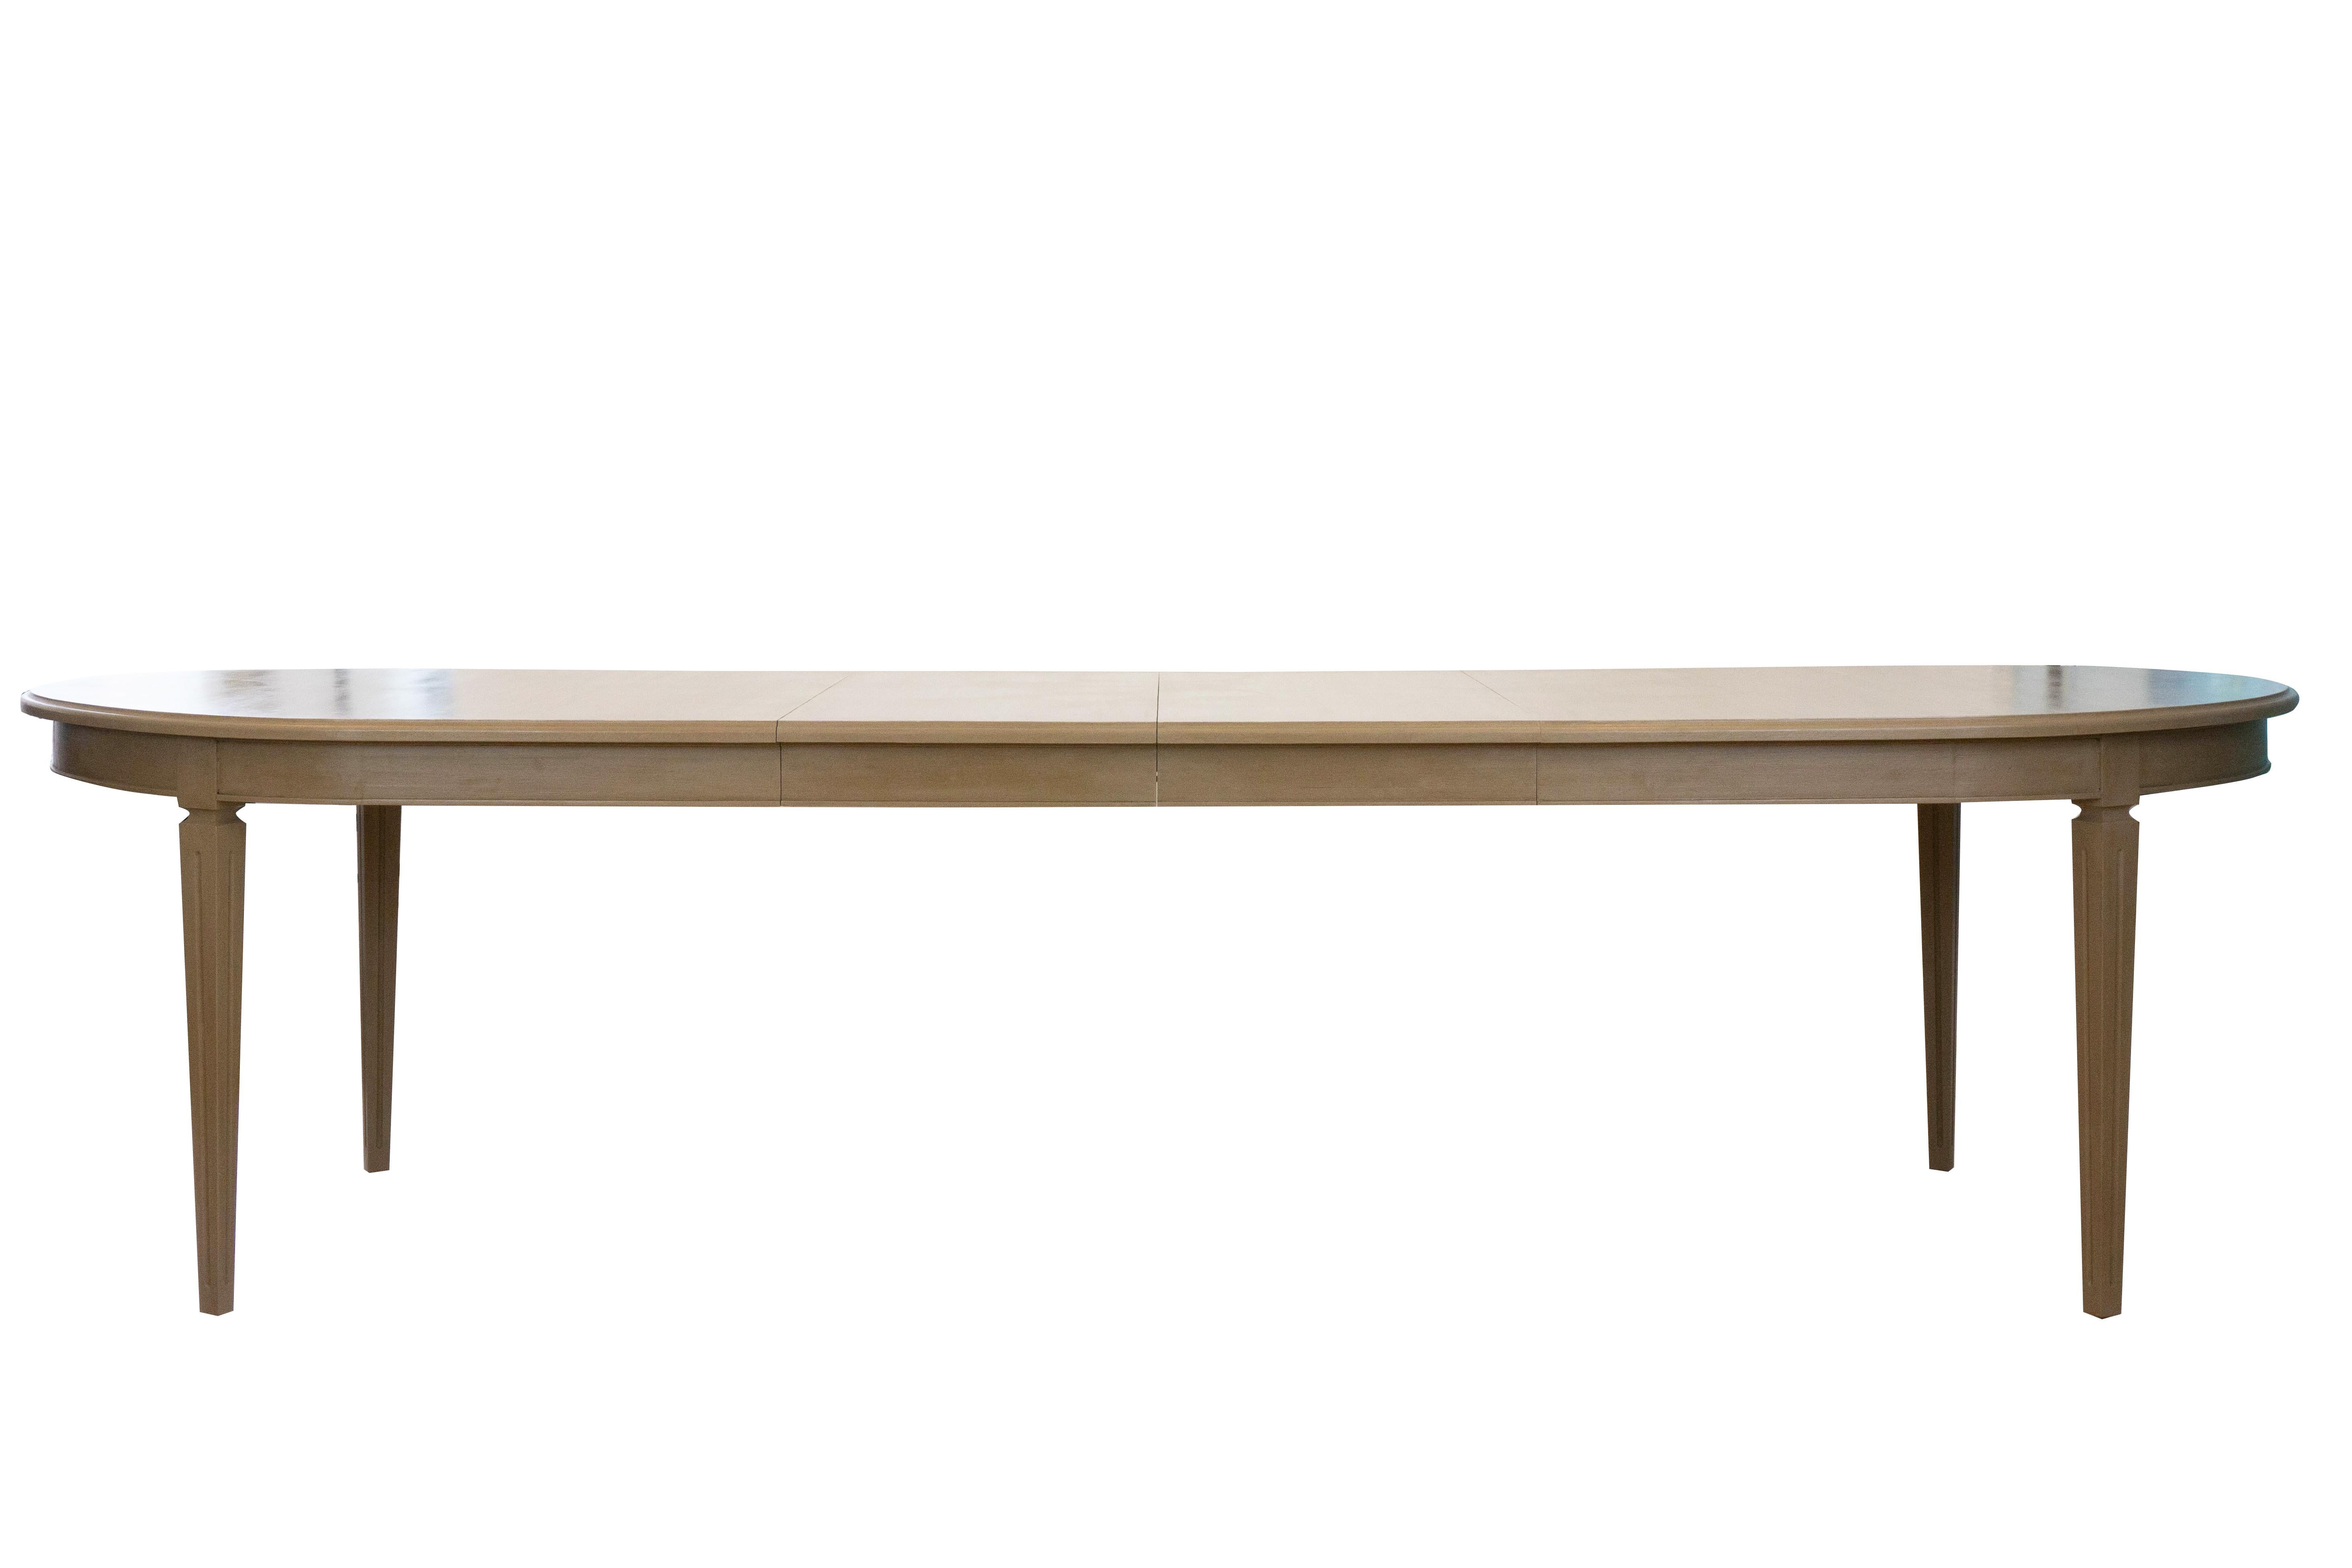 Our Yvelines dining table is made out of white oak and finished in a custom paint treatment. Includes 2 18